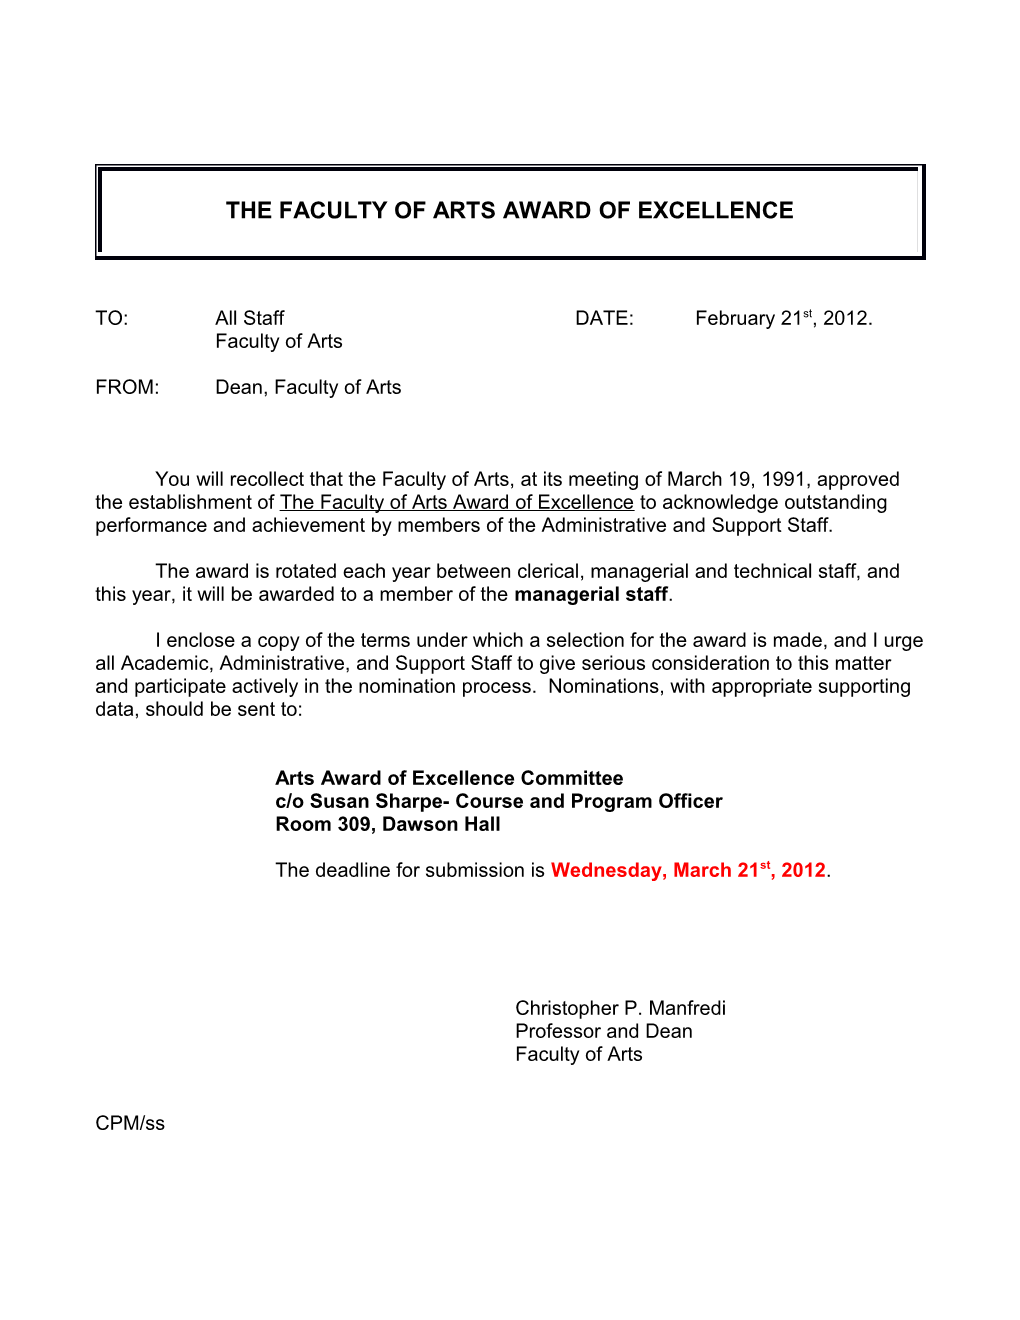 The Faculty of Arts Award of Excellence